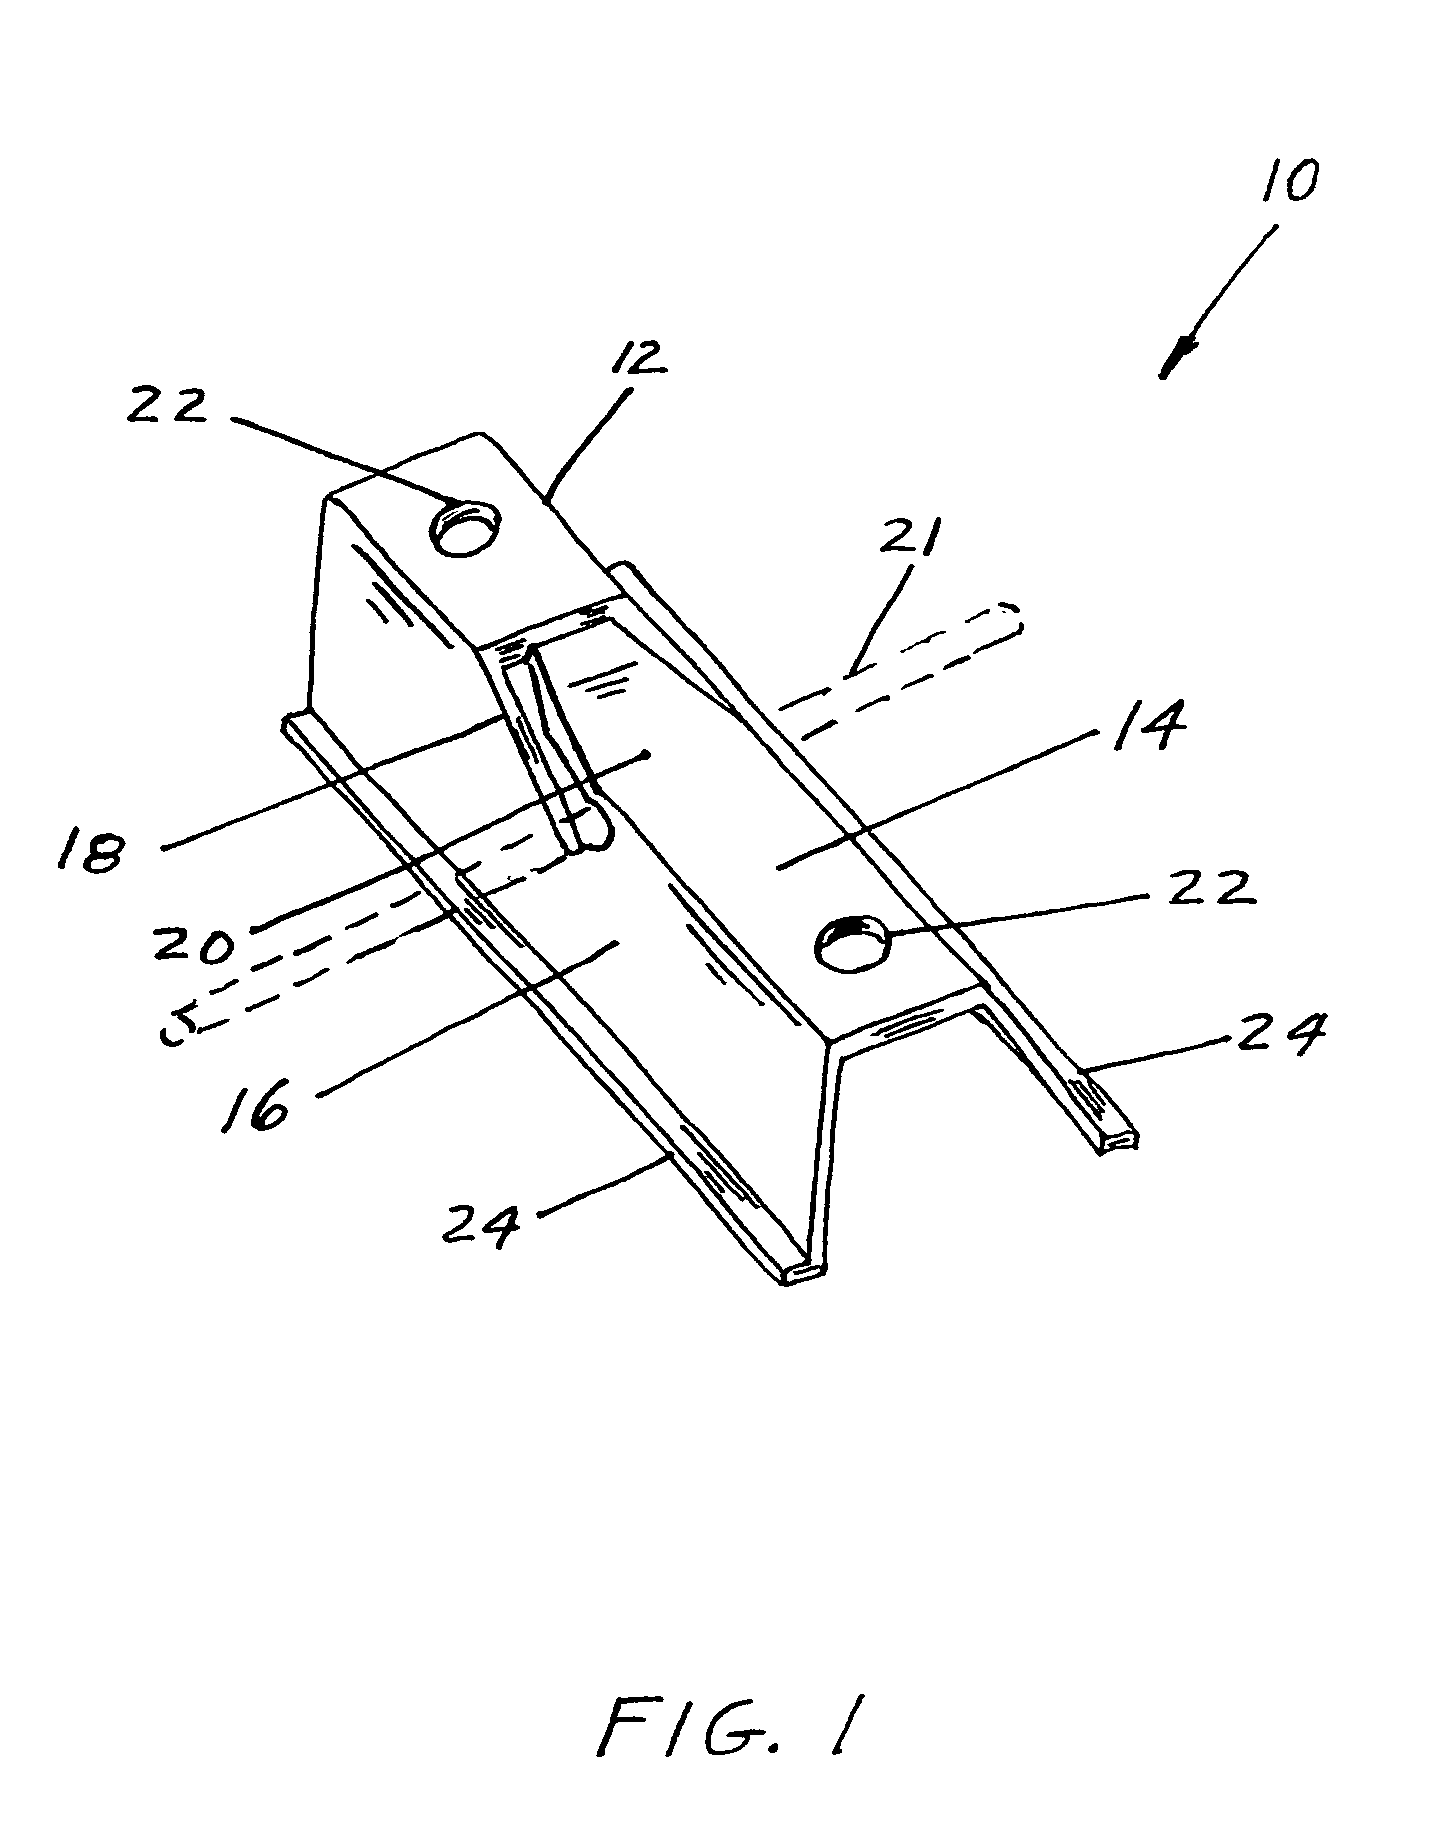 Fixture for hanging wire fence